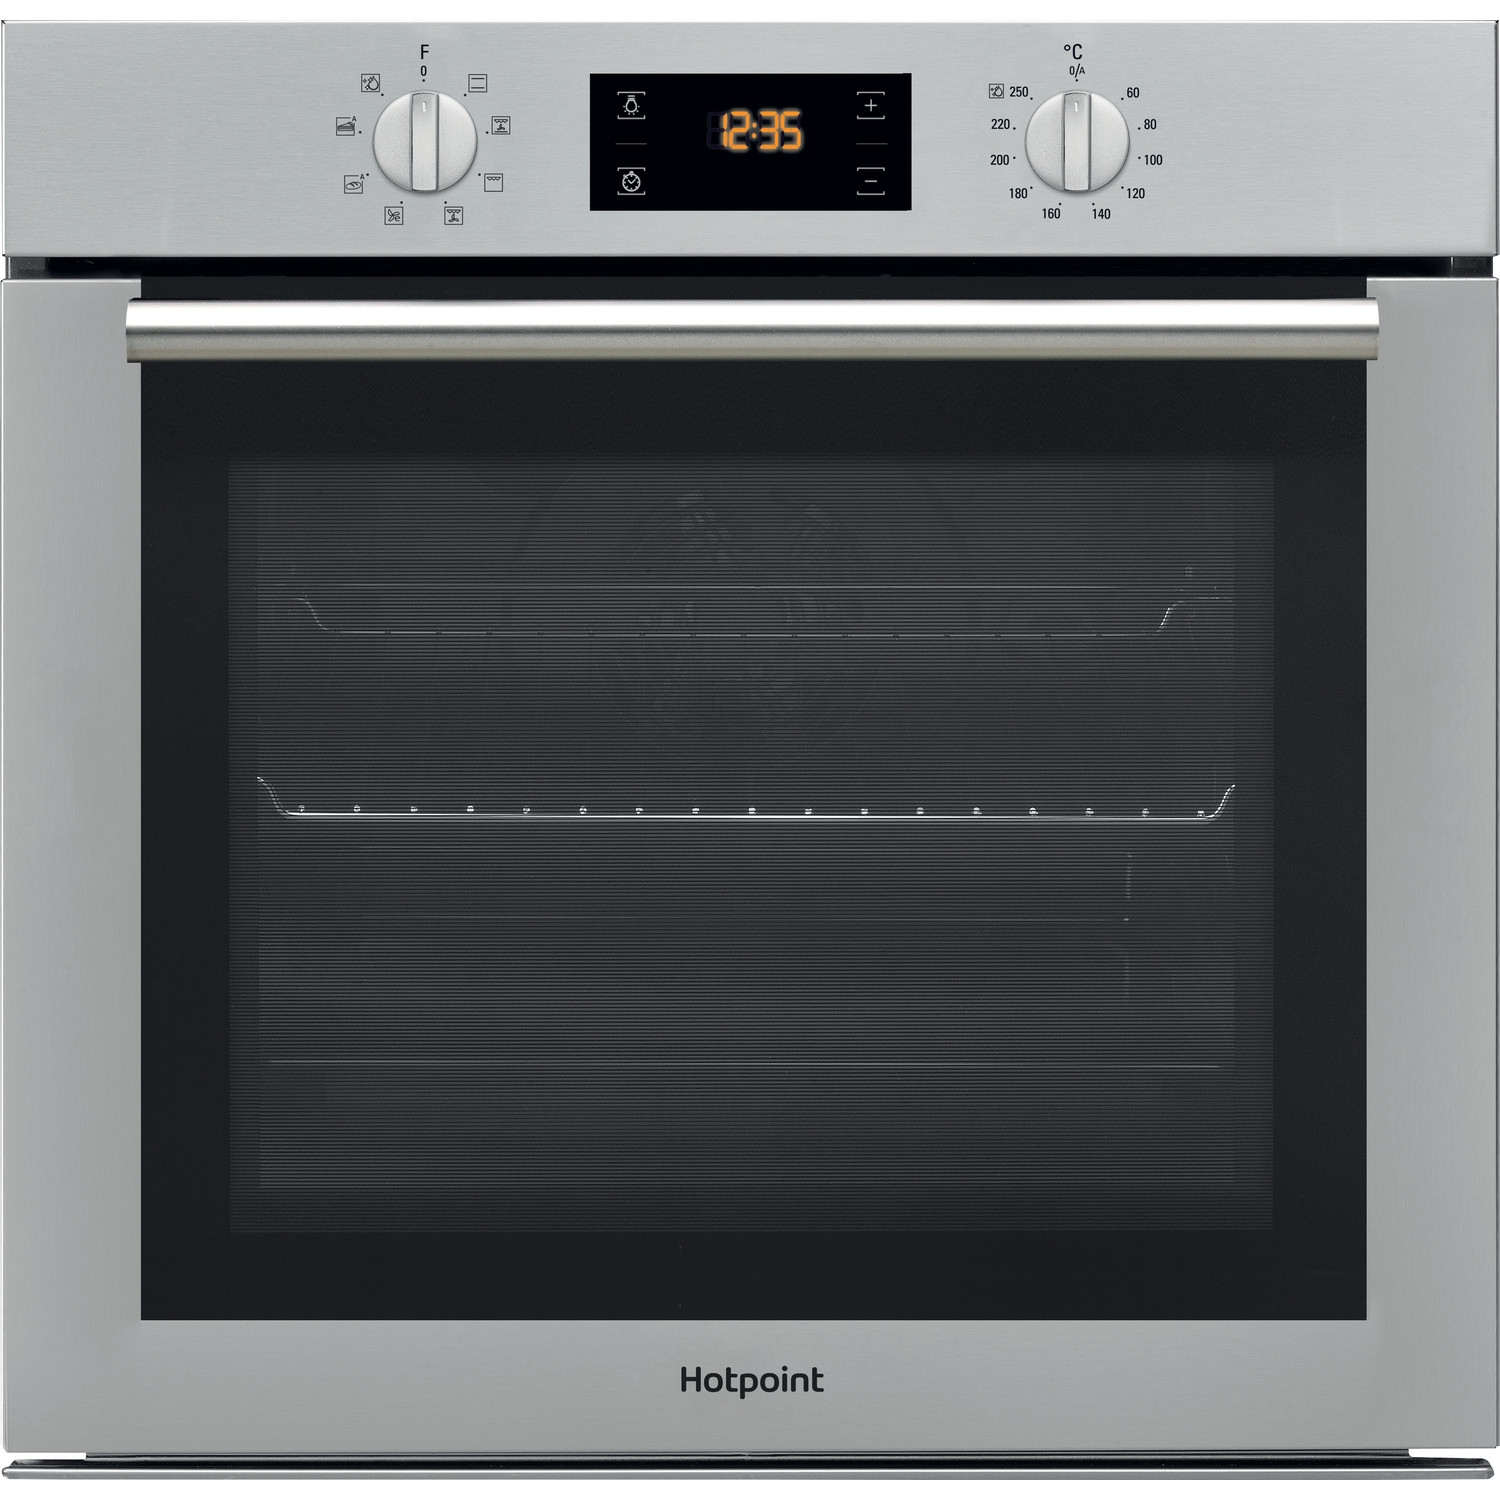 Hotpoint SA4544CIX 59.5cm Built In Electric Single Oven - Silver - 5